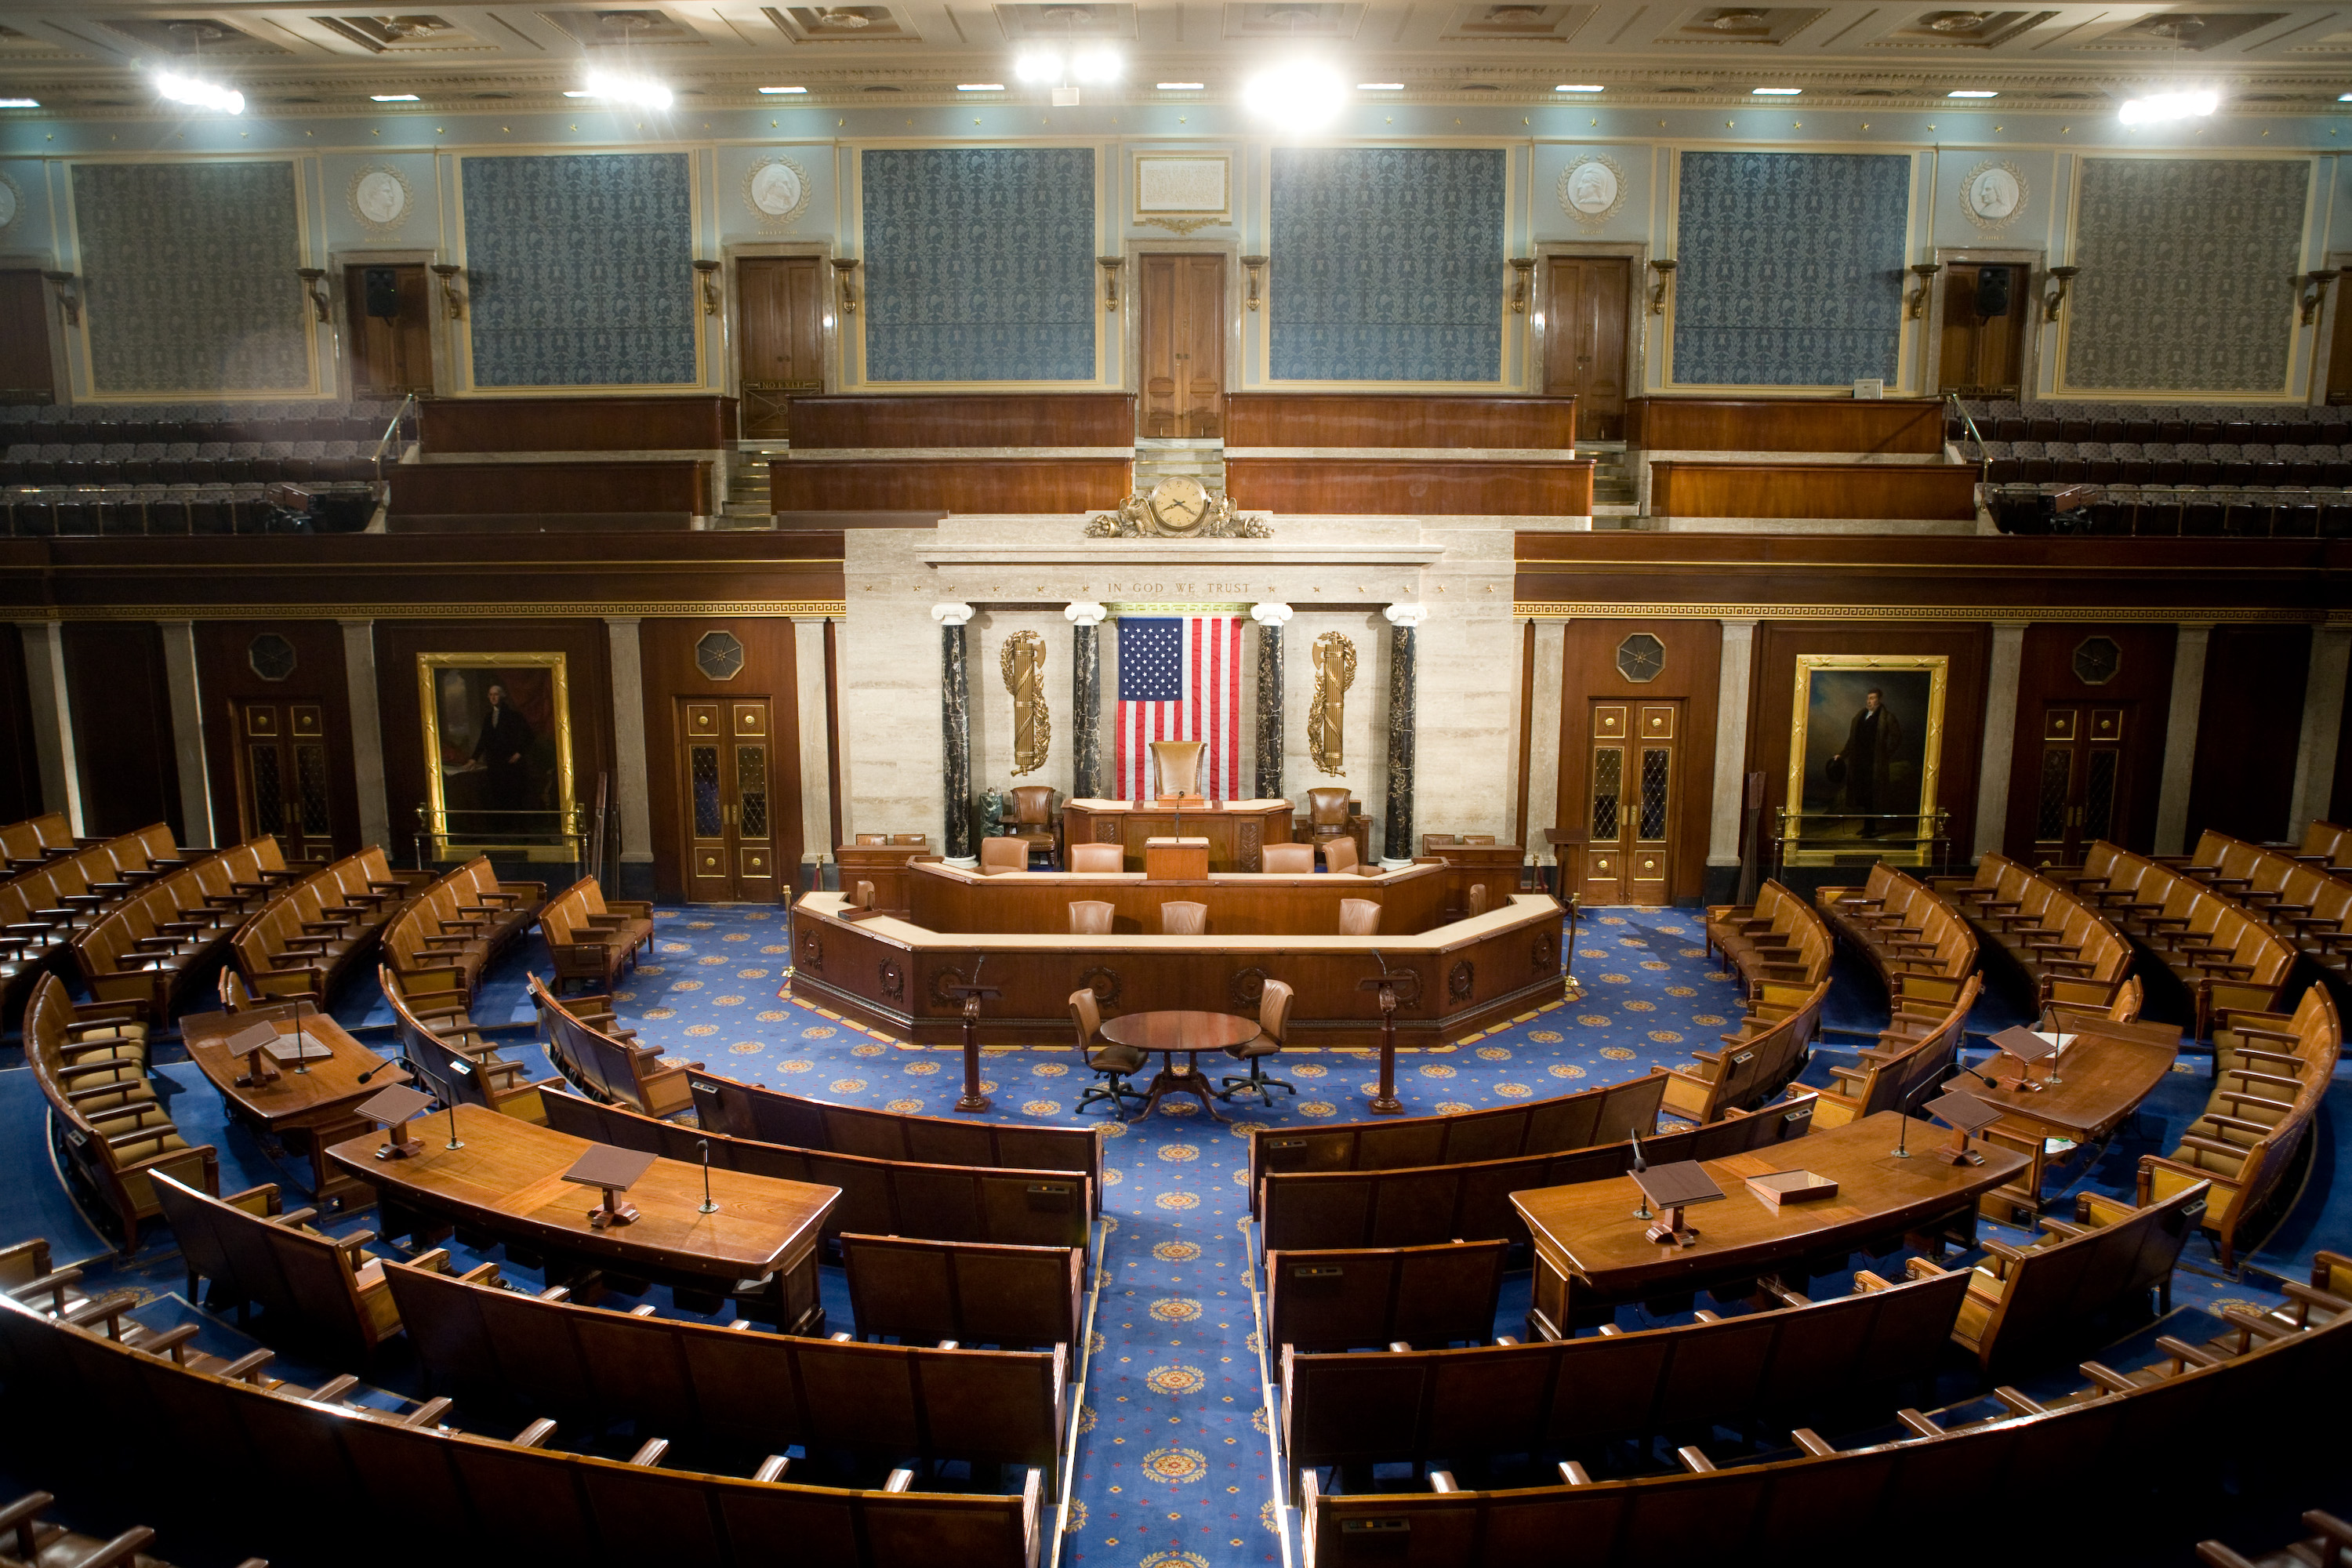 The U.S. House of Representatives chamber is seen December 8, 2008 in Washington, DC. Members of the media were allowed access to film and photograph the room for the first time in six years. (Brendan Hoffman—Getty Images)